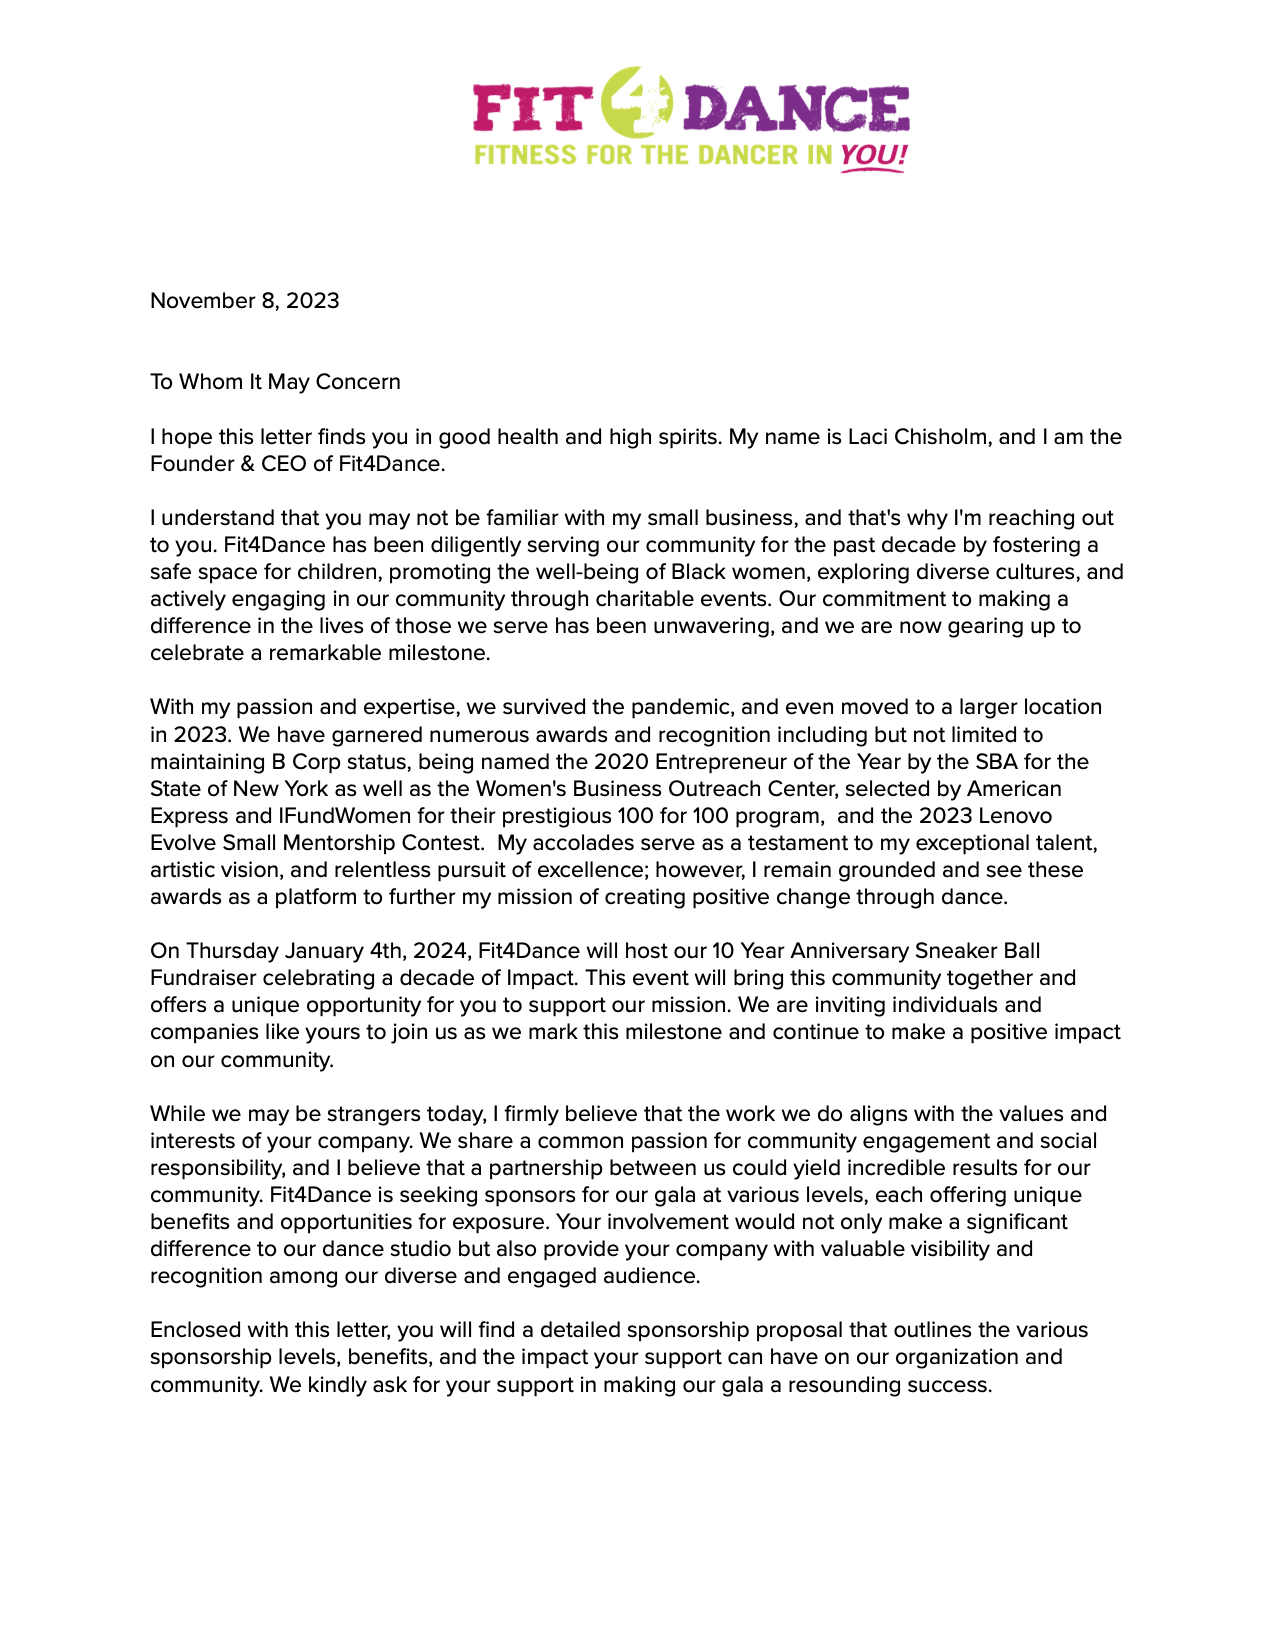 F4D Sponsorship Letter_A Decade of Impact copy.png